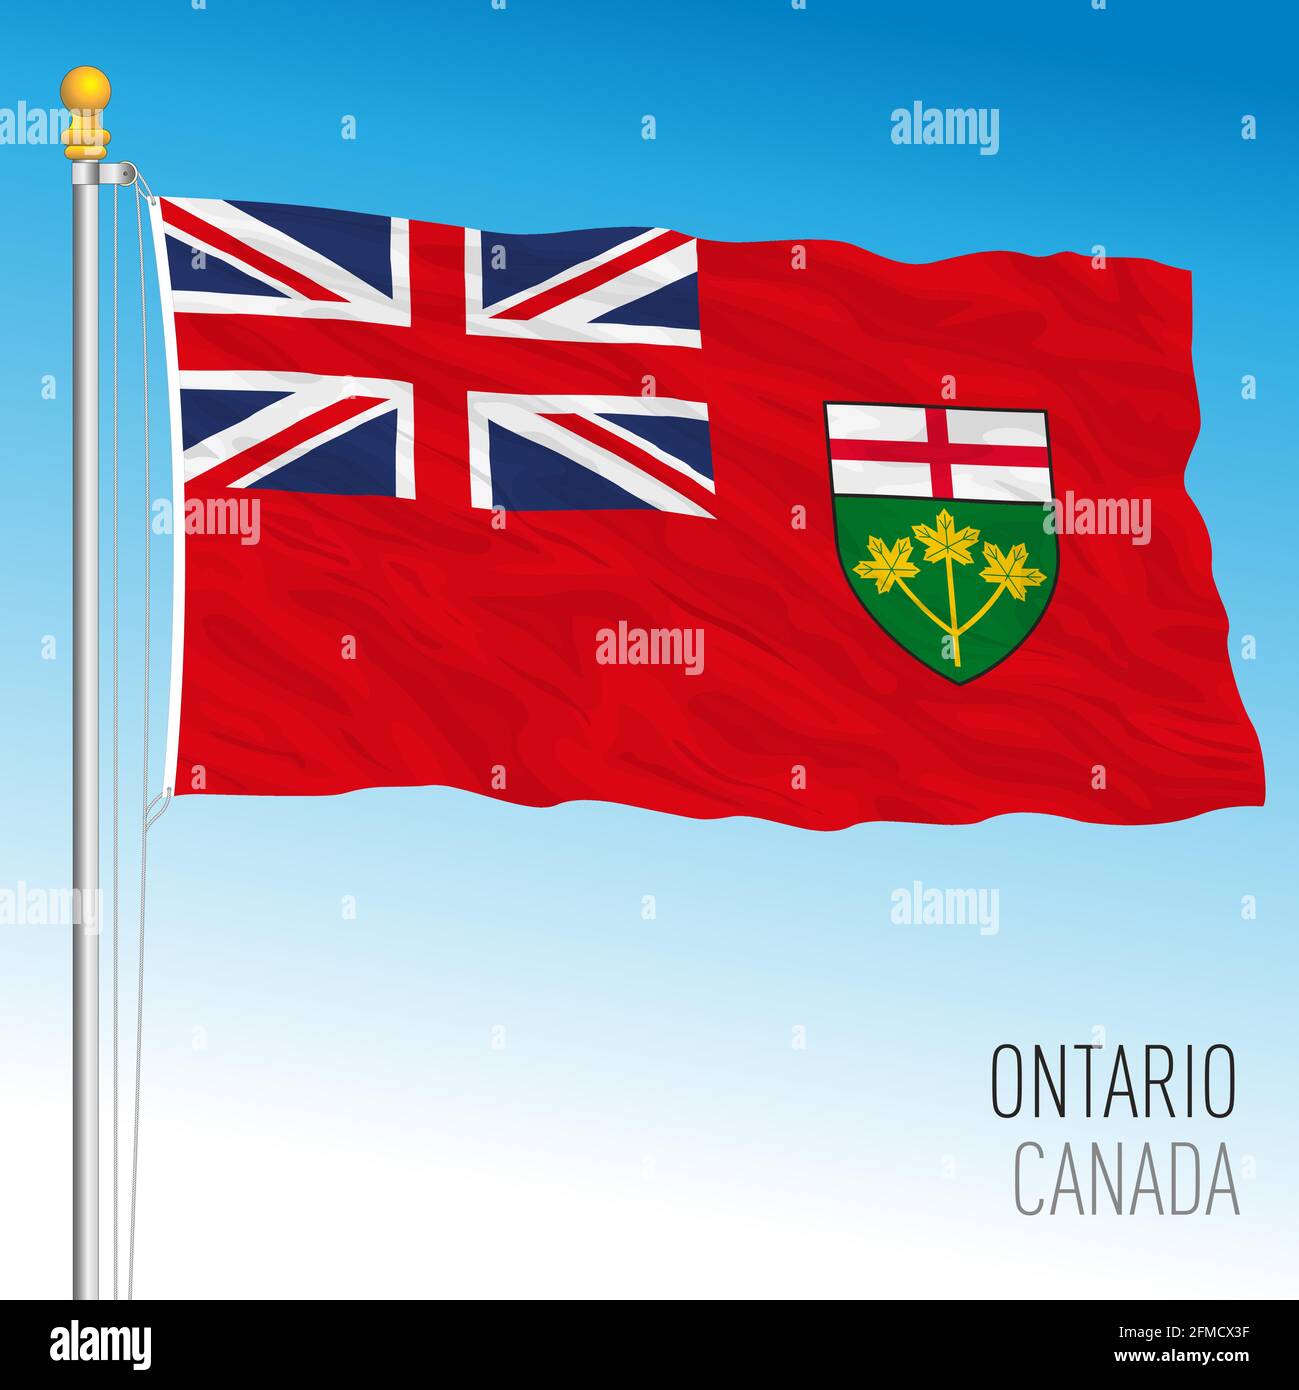 Ontario territorial and regional flag, Canada, north american country, vector illustration Stock Vector